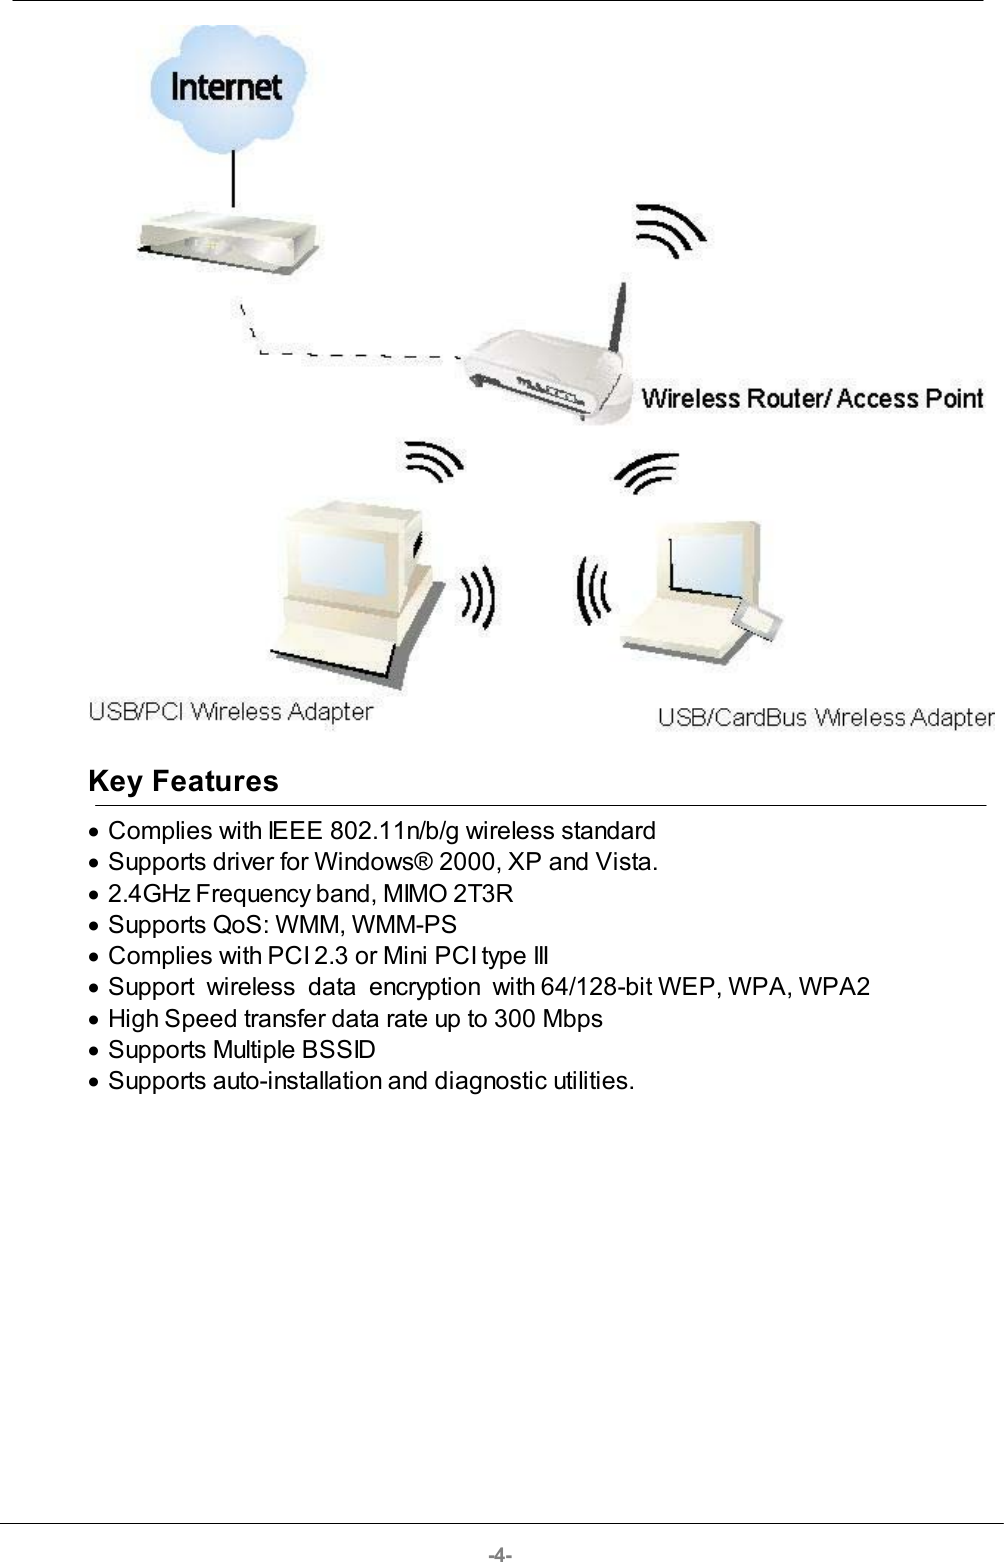 -4-Key Features·Complies with IEEE 802.11n/b/g wireless standard ·Supports driver for Windows® 2000, XP and Vista. ·2.4GHz Frequency band, MIMO 2T3R·Supports QoS: WMM, WMM-PS ·Complies with PCI 2.3 or Mini PCI type III·Support  wireless  data  encryption  with 64/128-bit WEP, WPA, WPA2·High Speed transfer data rate up to 300 Mbps ·Supports Multiple BSSID·Supports auto-installation and diagnostic utilities.